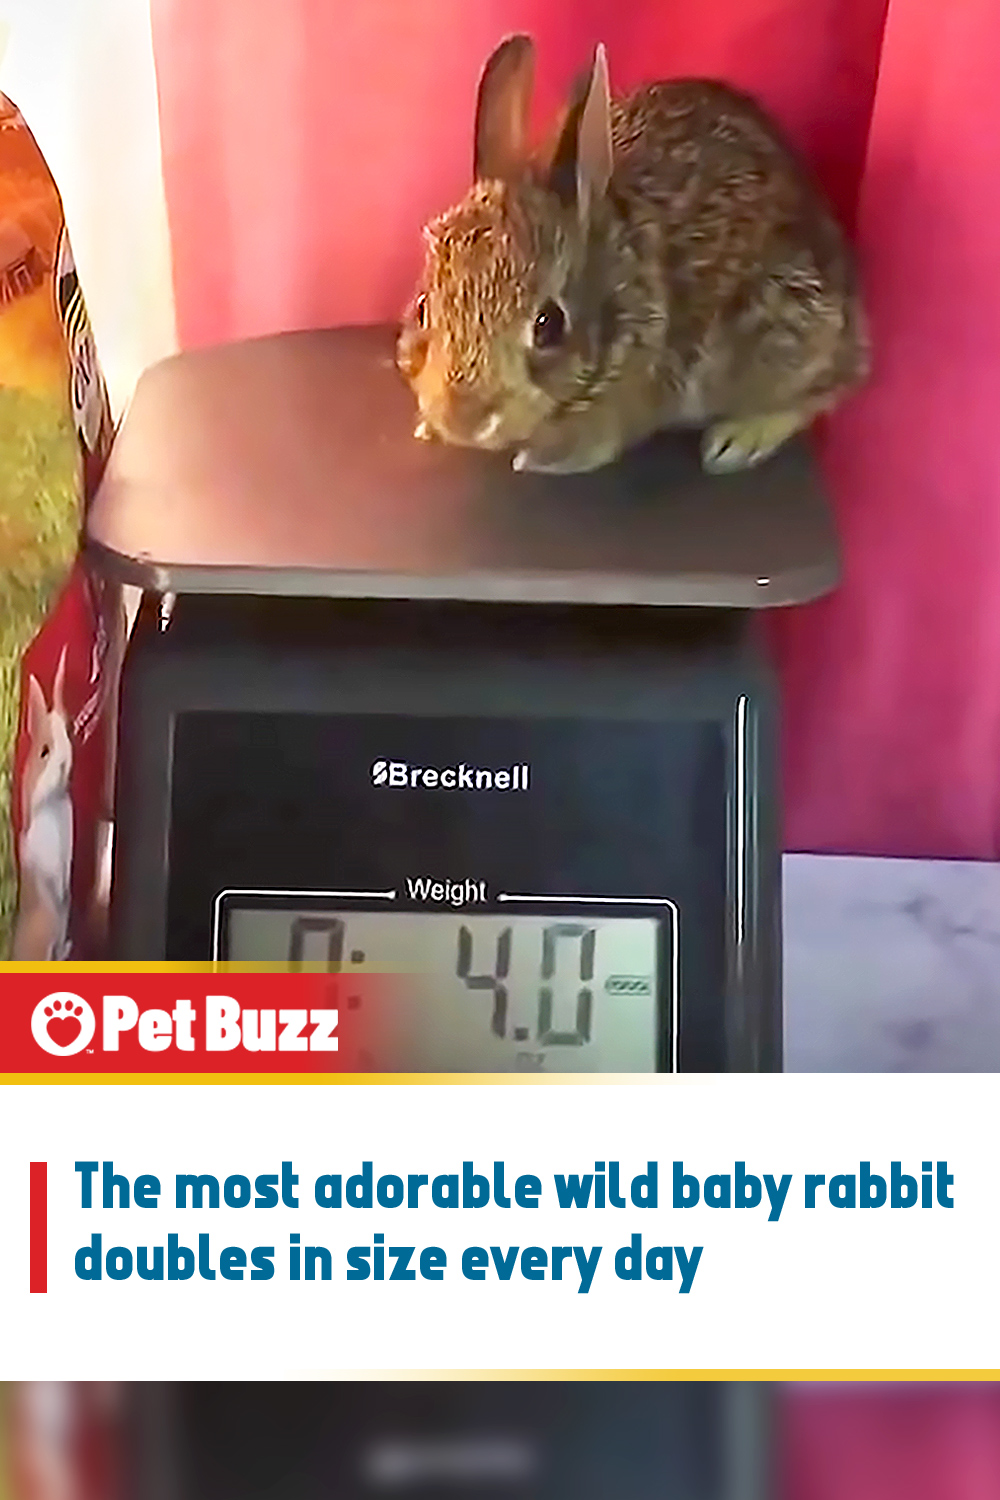 The most adorable wild baby rabbit doubles in size every day